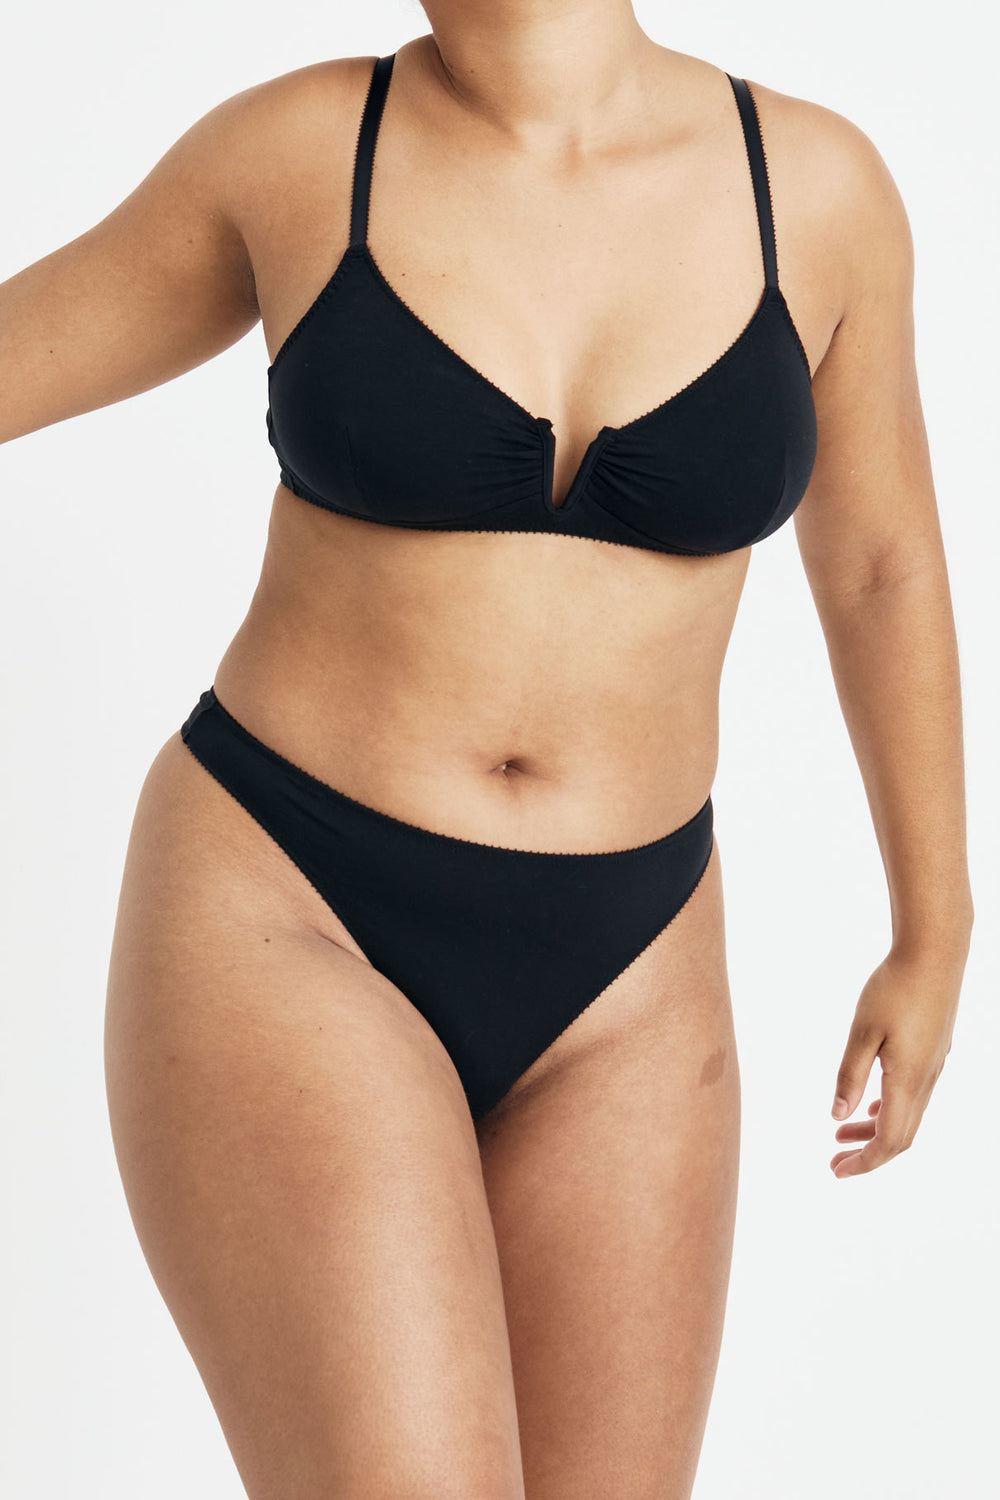 Videris Lingerie Angela underwire free soft cup bra in black TENCEL™ has a triangle shaped cup and front gathering detail